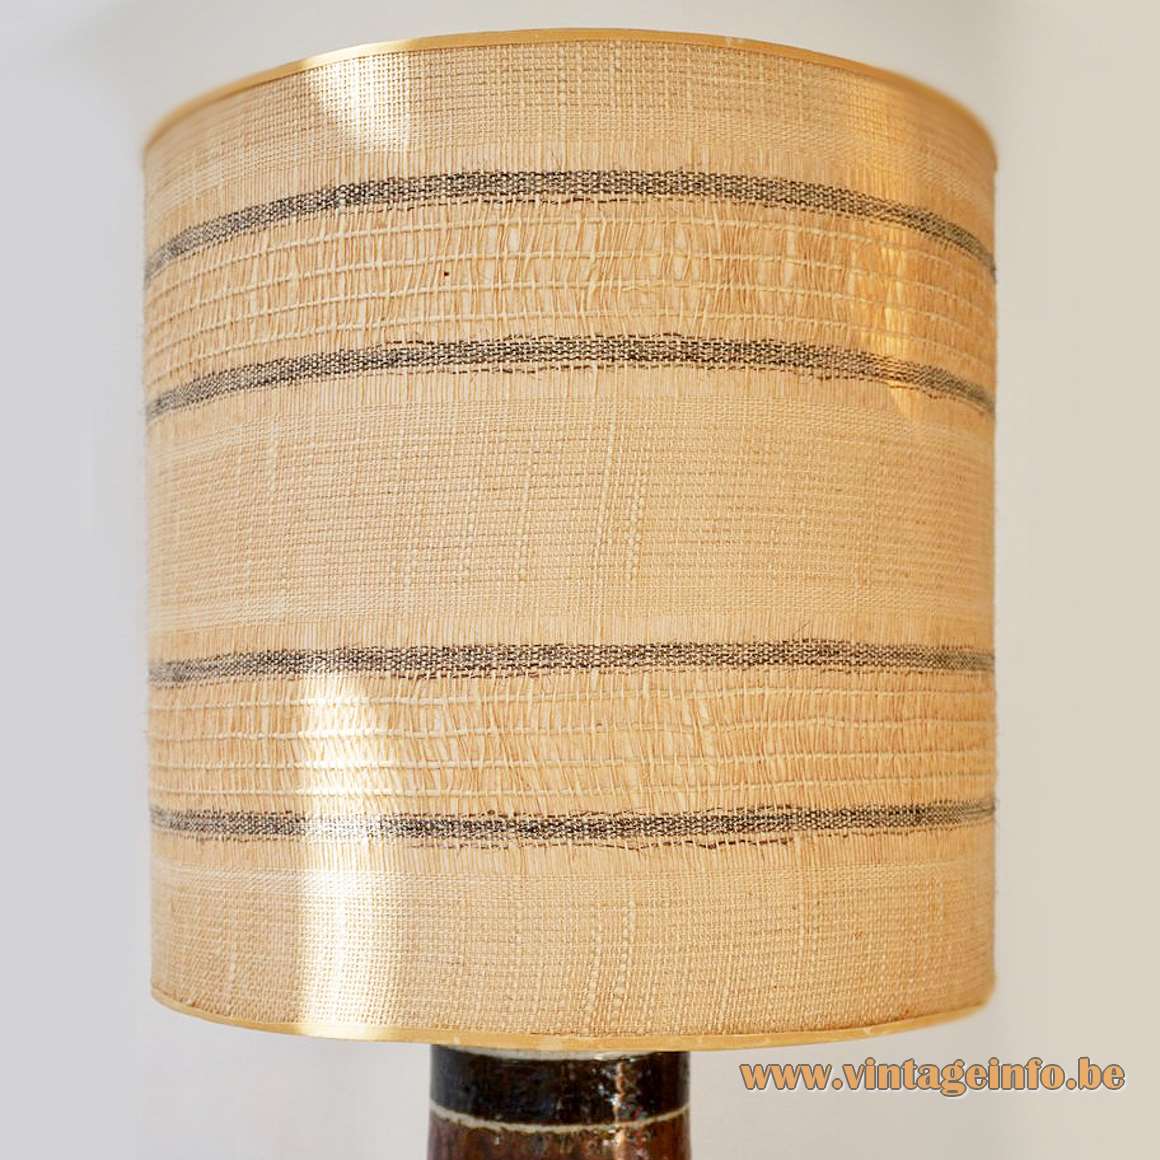 Inger Persson table lamp round ceramics black brown white glazed fabric lampshade 1960s Rörstrand Sweden